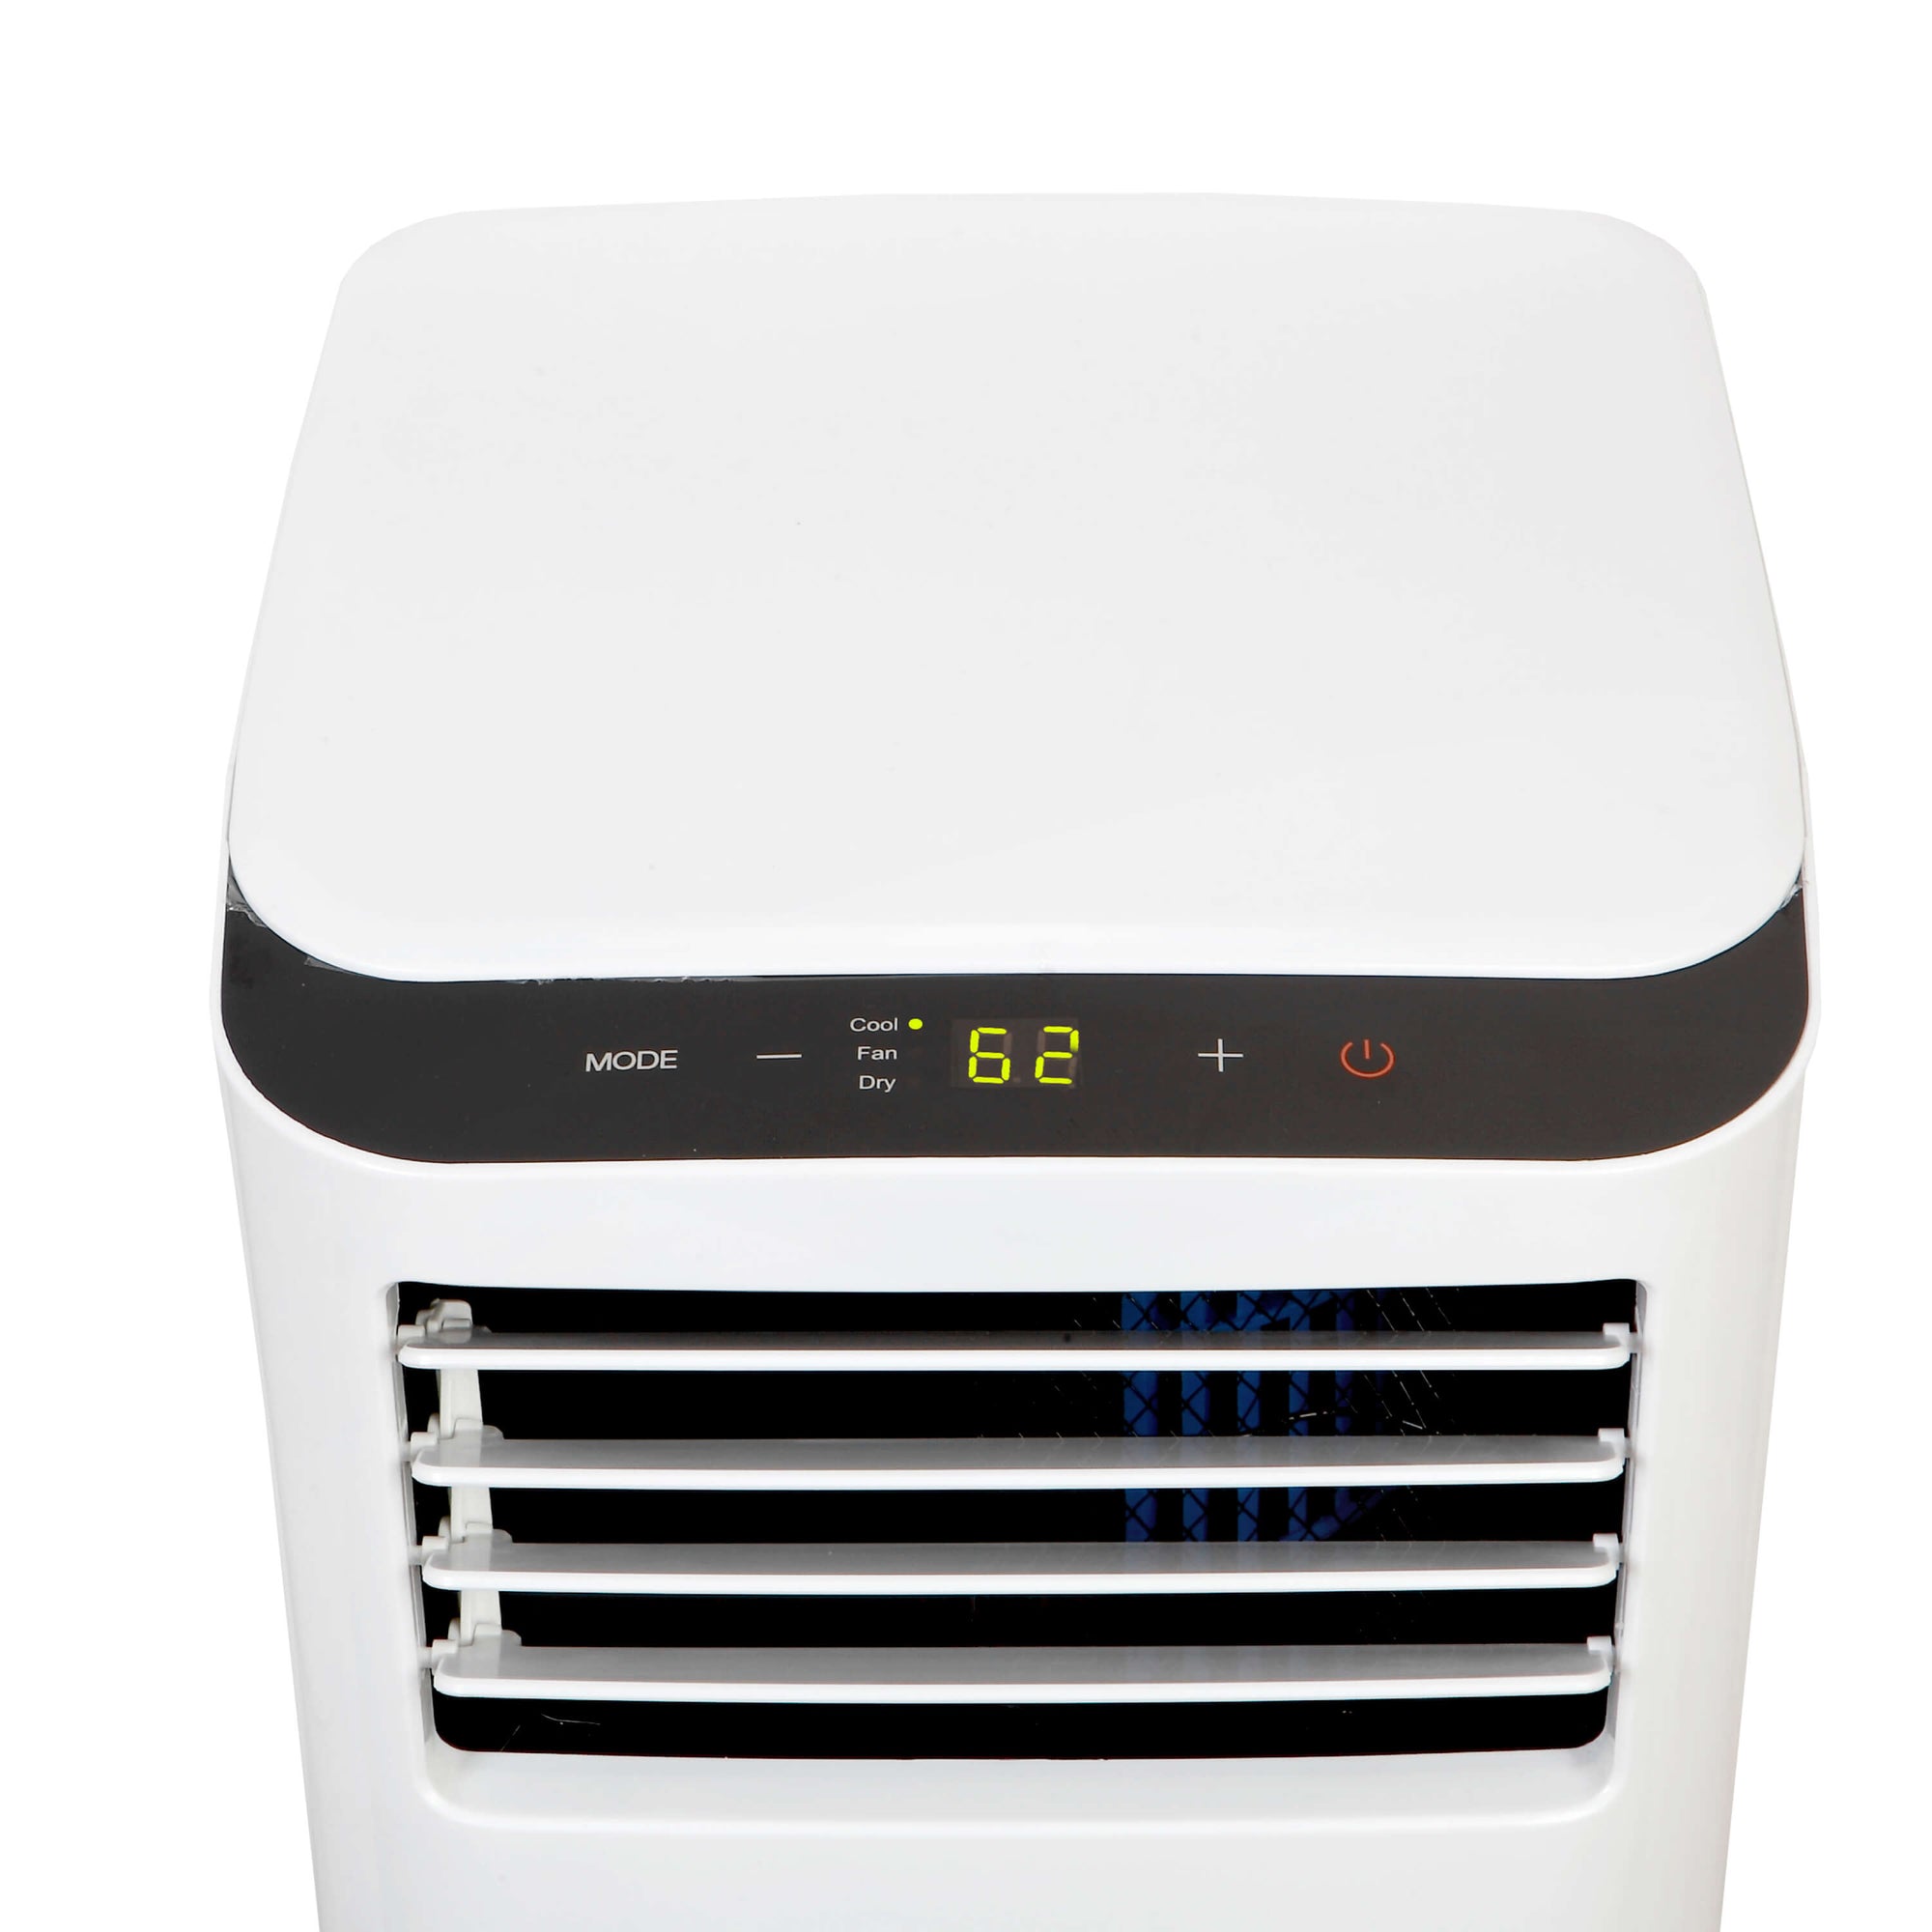 Whynter ARC-102CS 10,000 BTU Remote Control Compact Portable Air Conditioner in White New